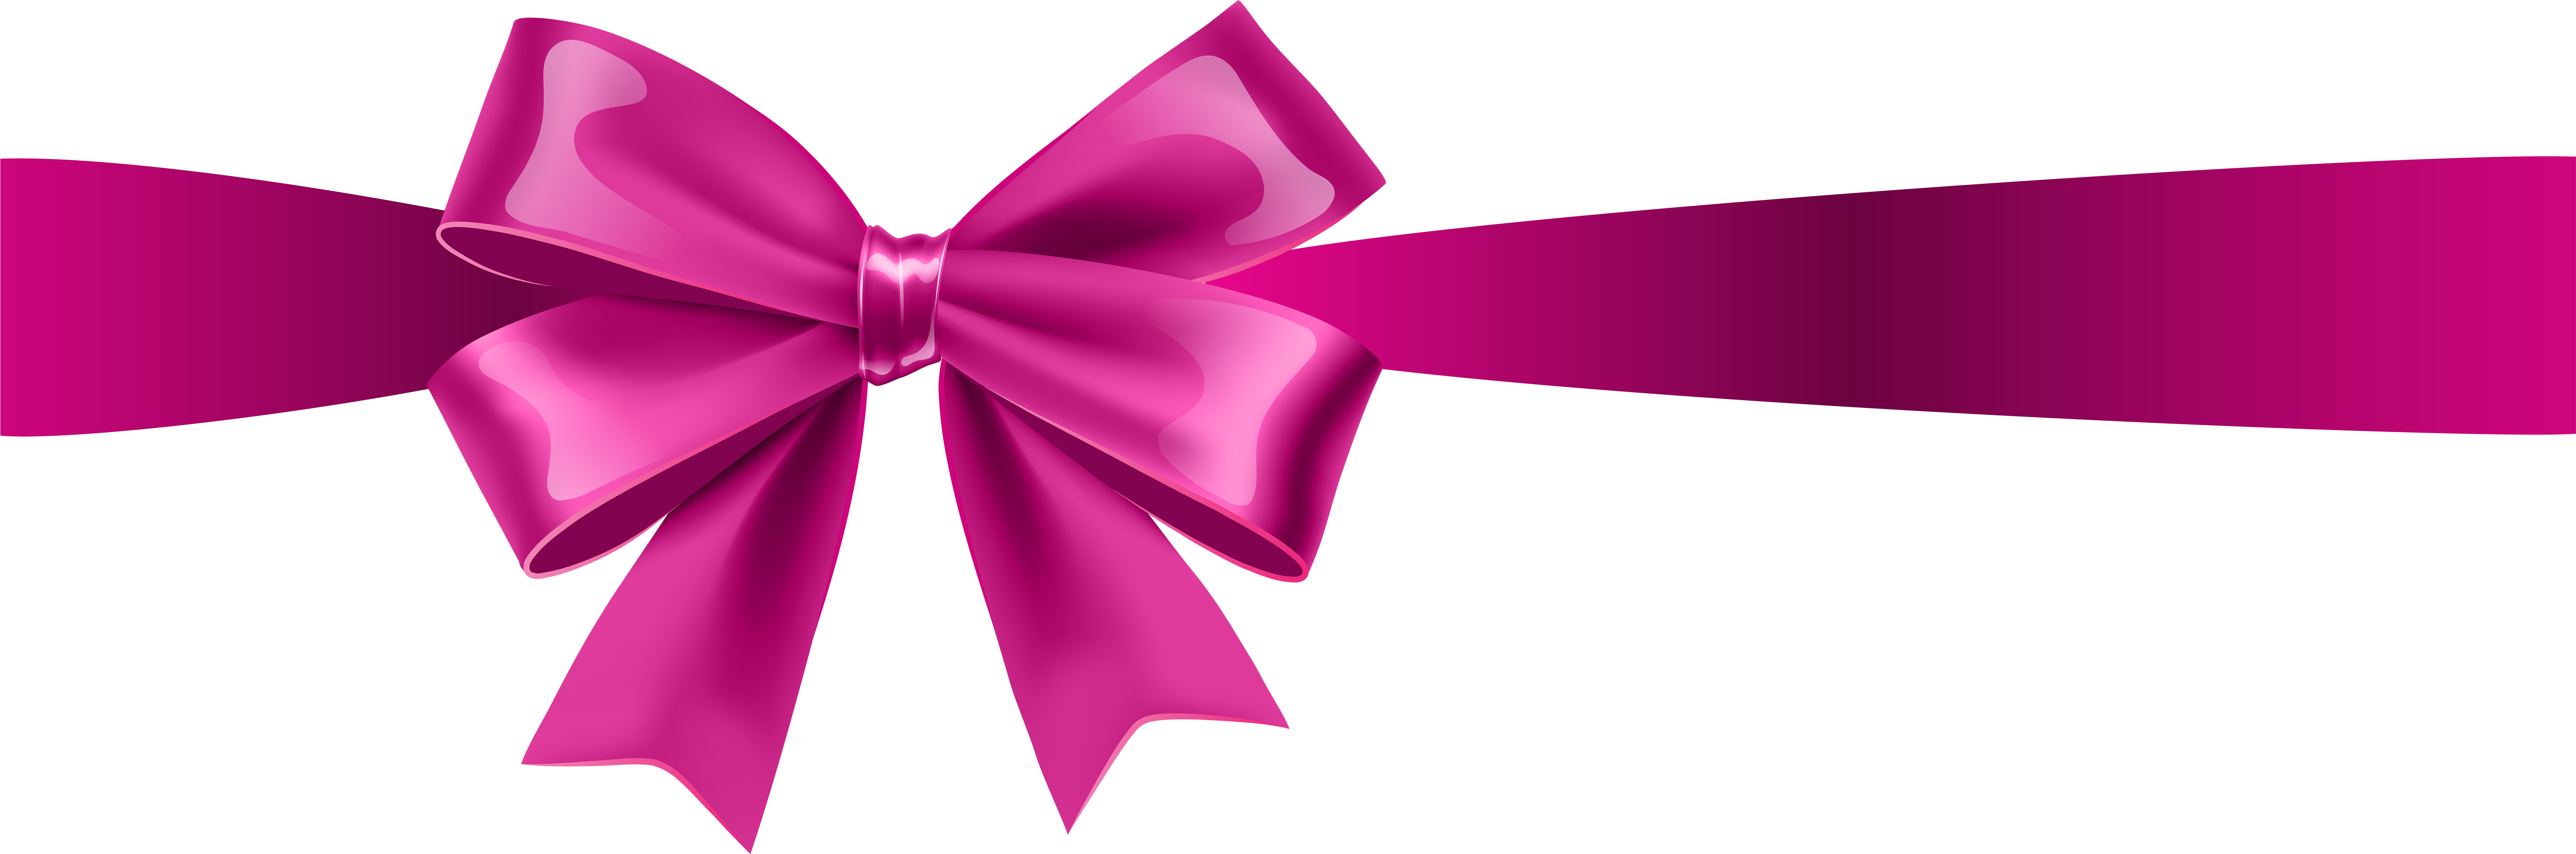 Other Popular Clip Arts - Pink Ribbon Bow Png (8000x2736)